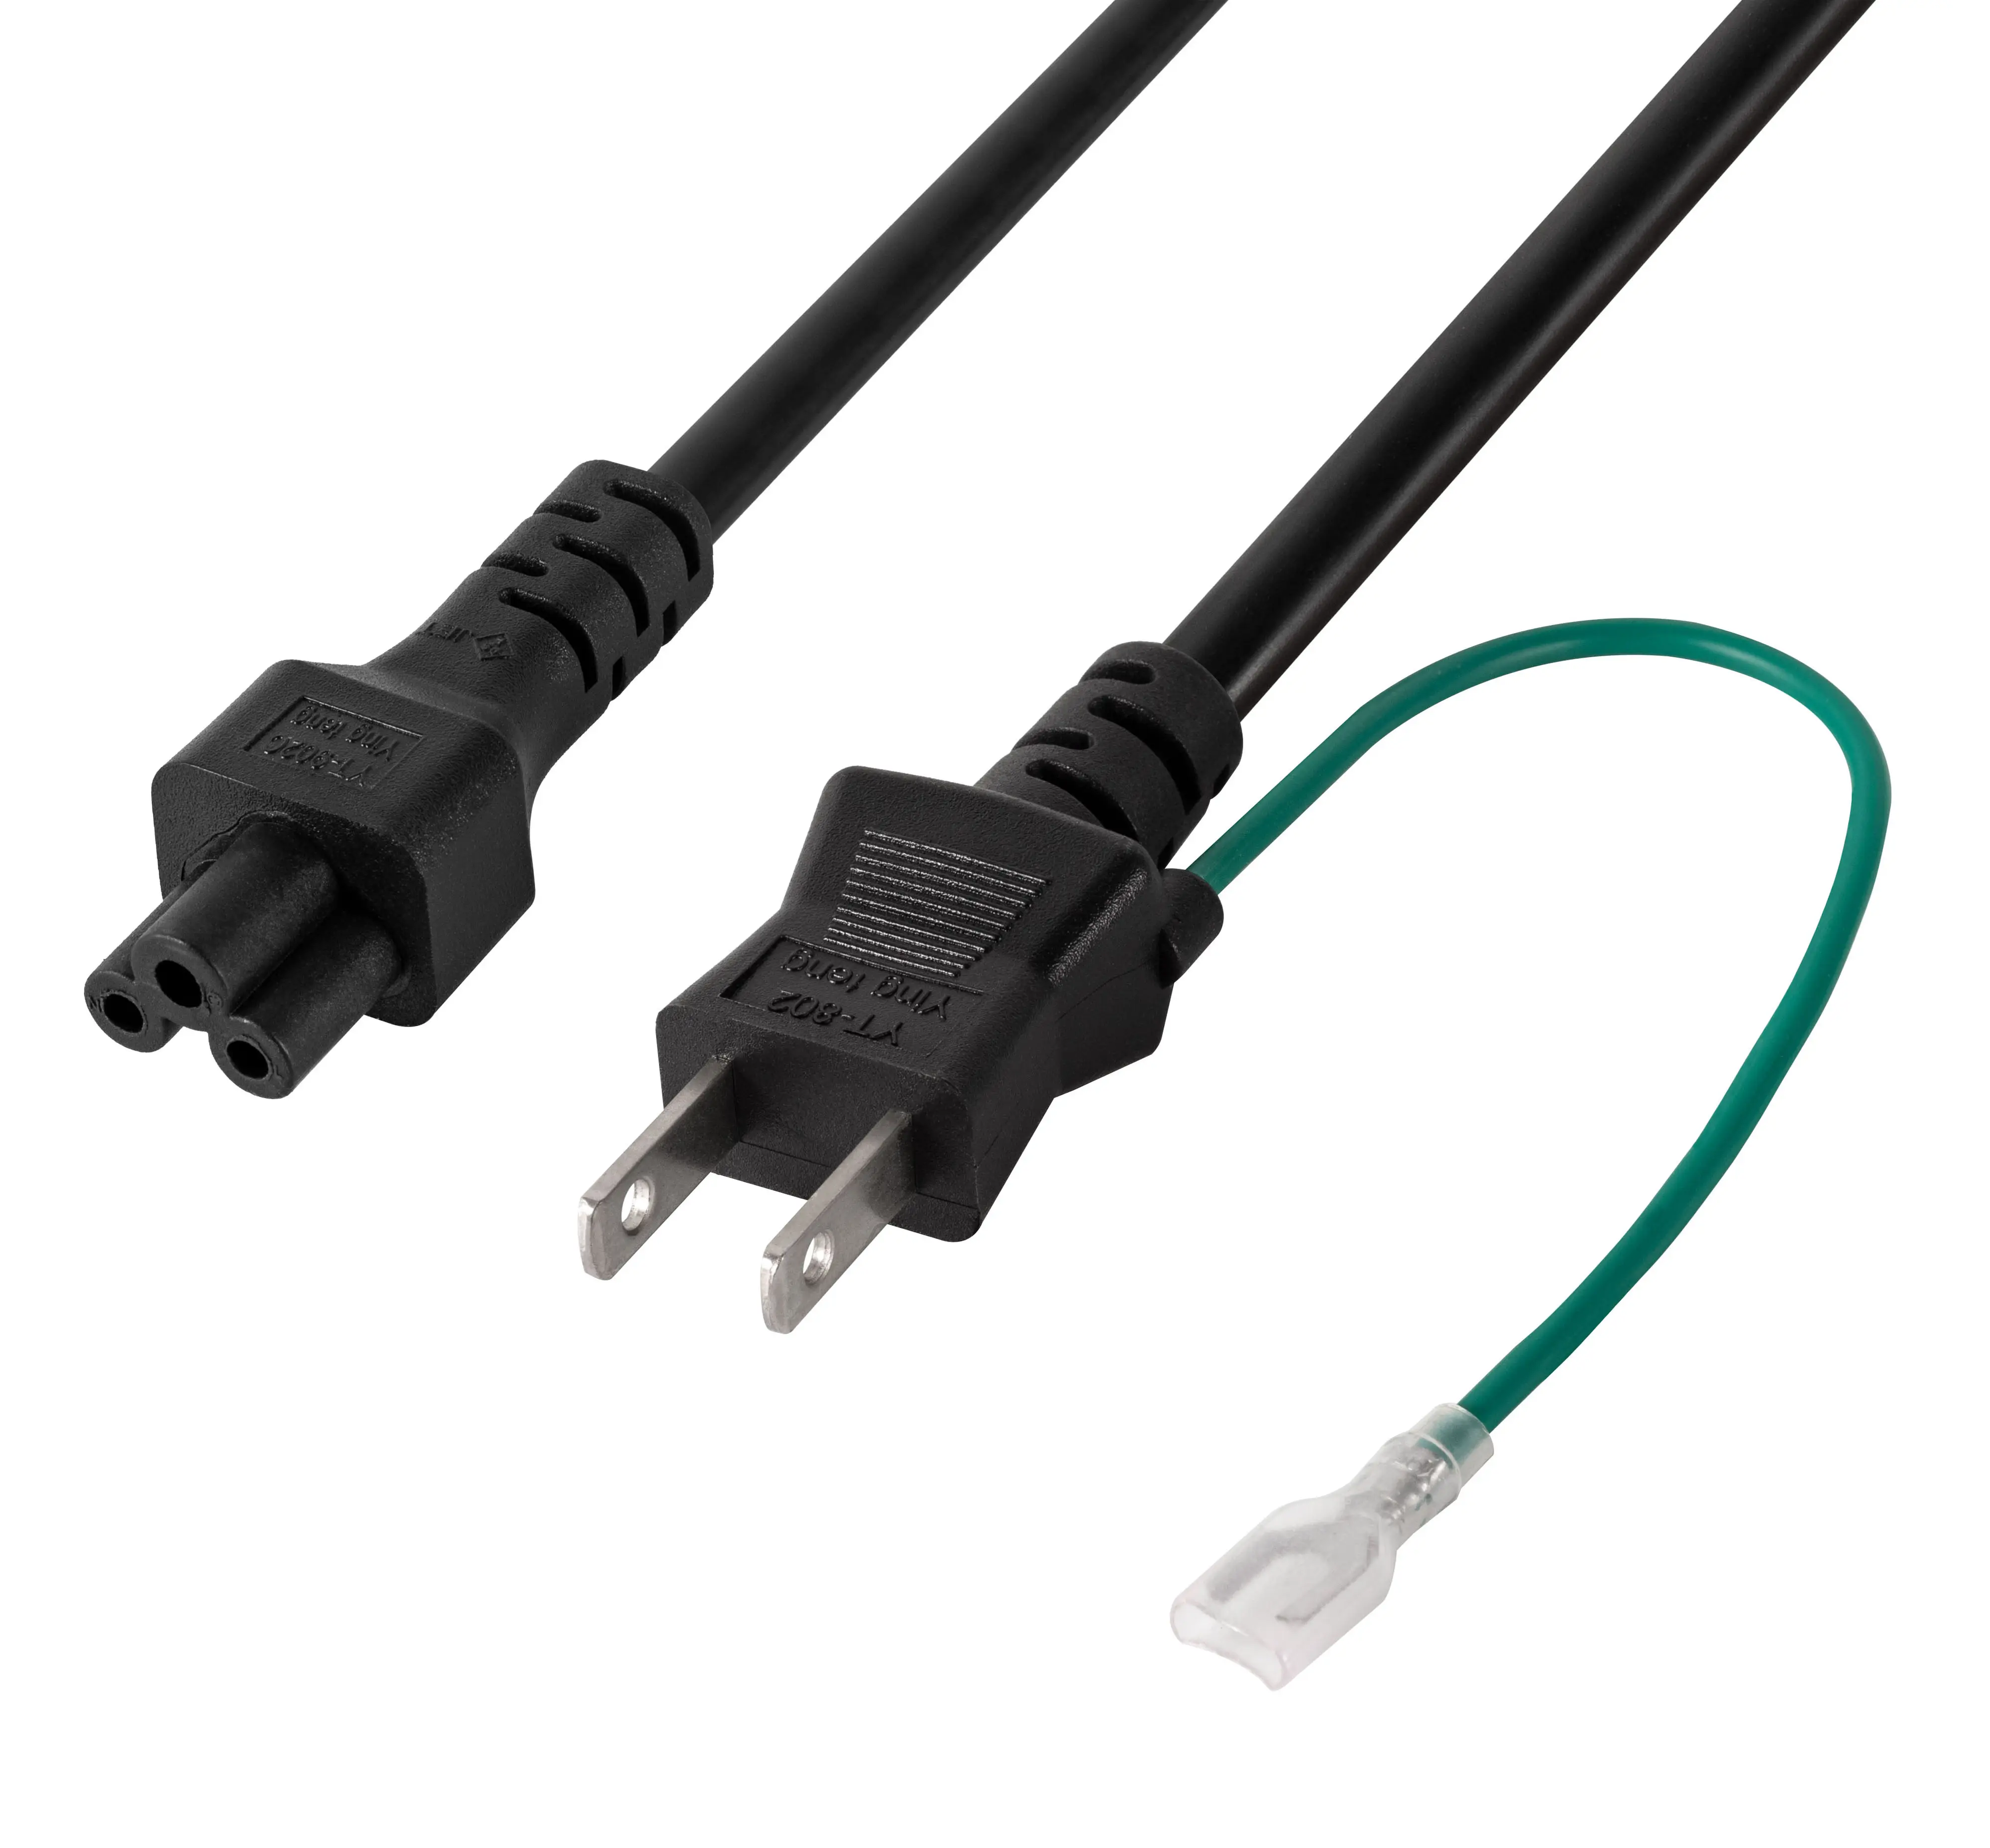 Japanese PSE JET Standard 3 Prong Laptop Computer 3 Pins Power Cable 15A/20A 250V Pse Japan Power Cord